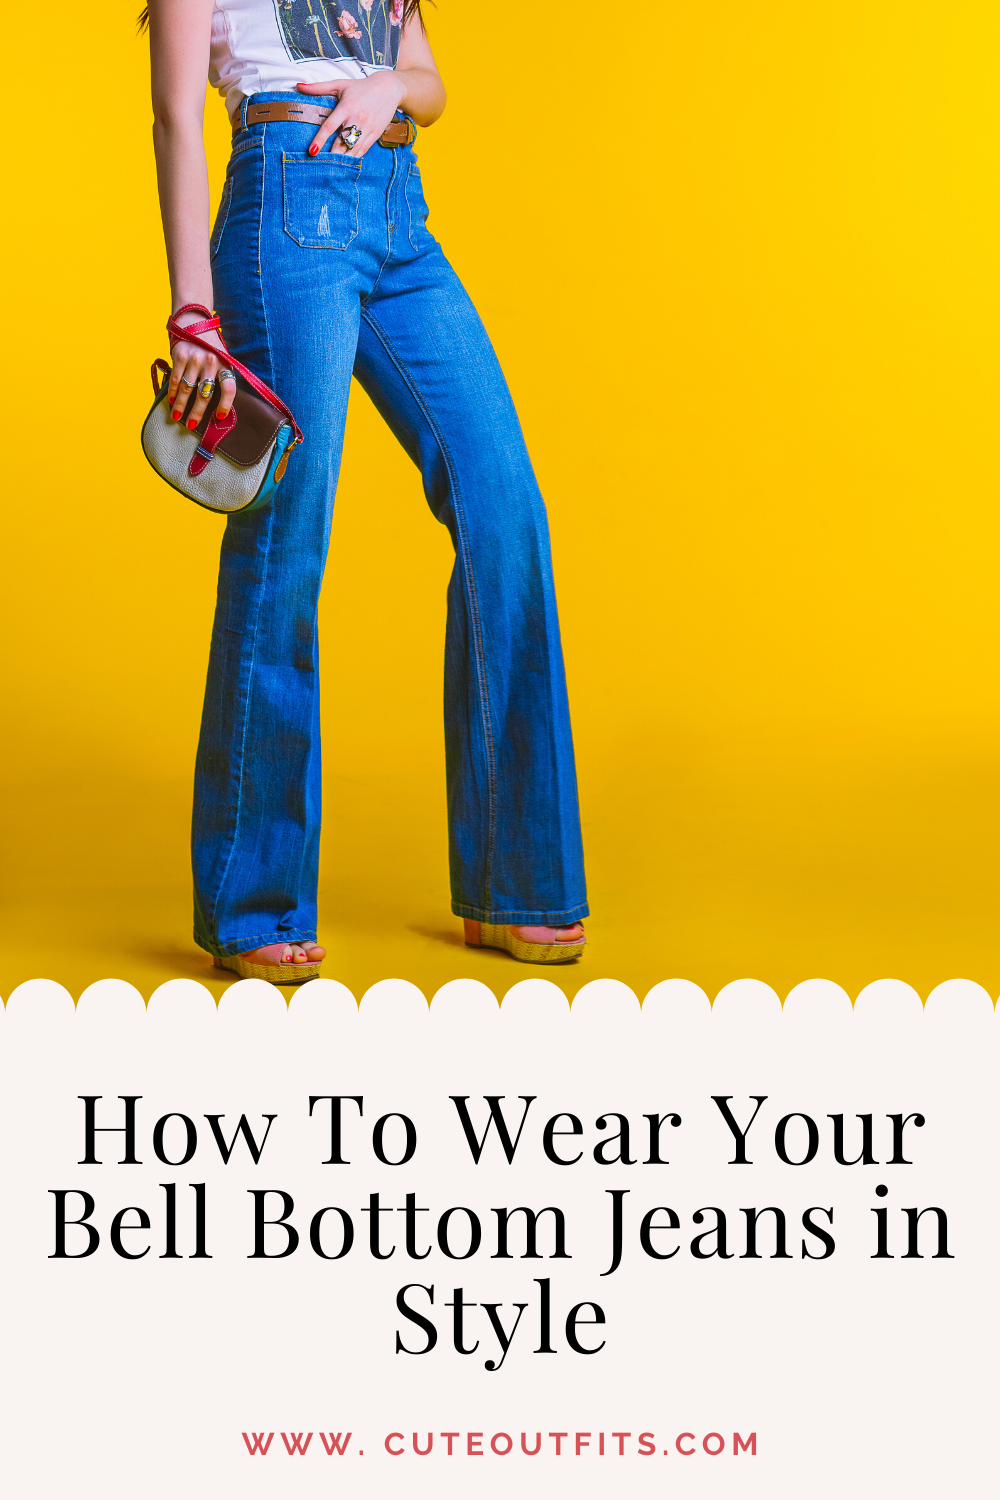 placard | How To Wear Your Bell Bottom Jeans in Style